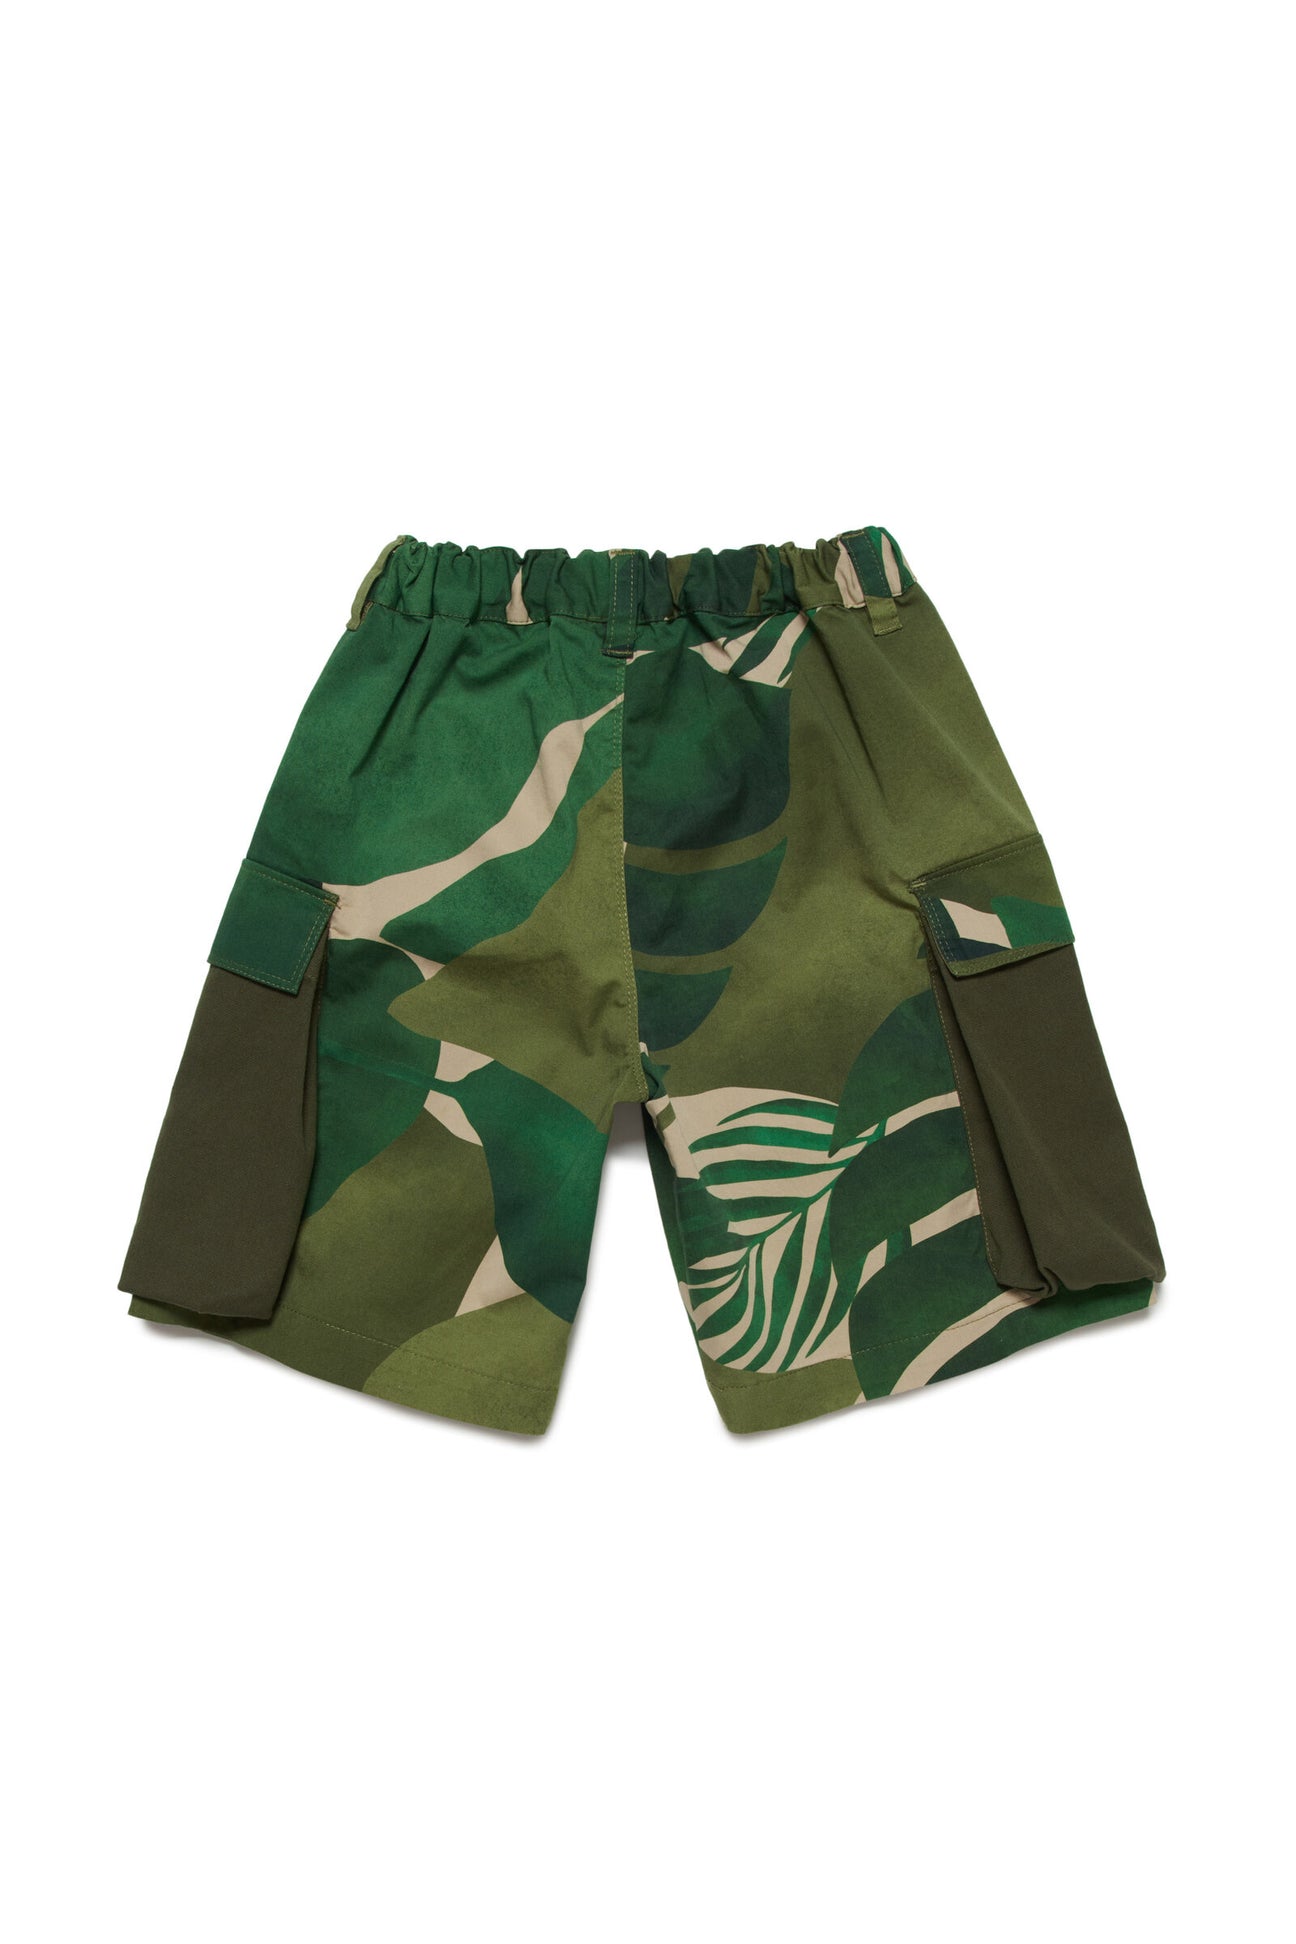 Deadstock shorts  with rainforest patterned fabric applications Deadstock shorts  with rainforest patterned fabric applications